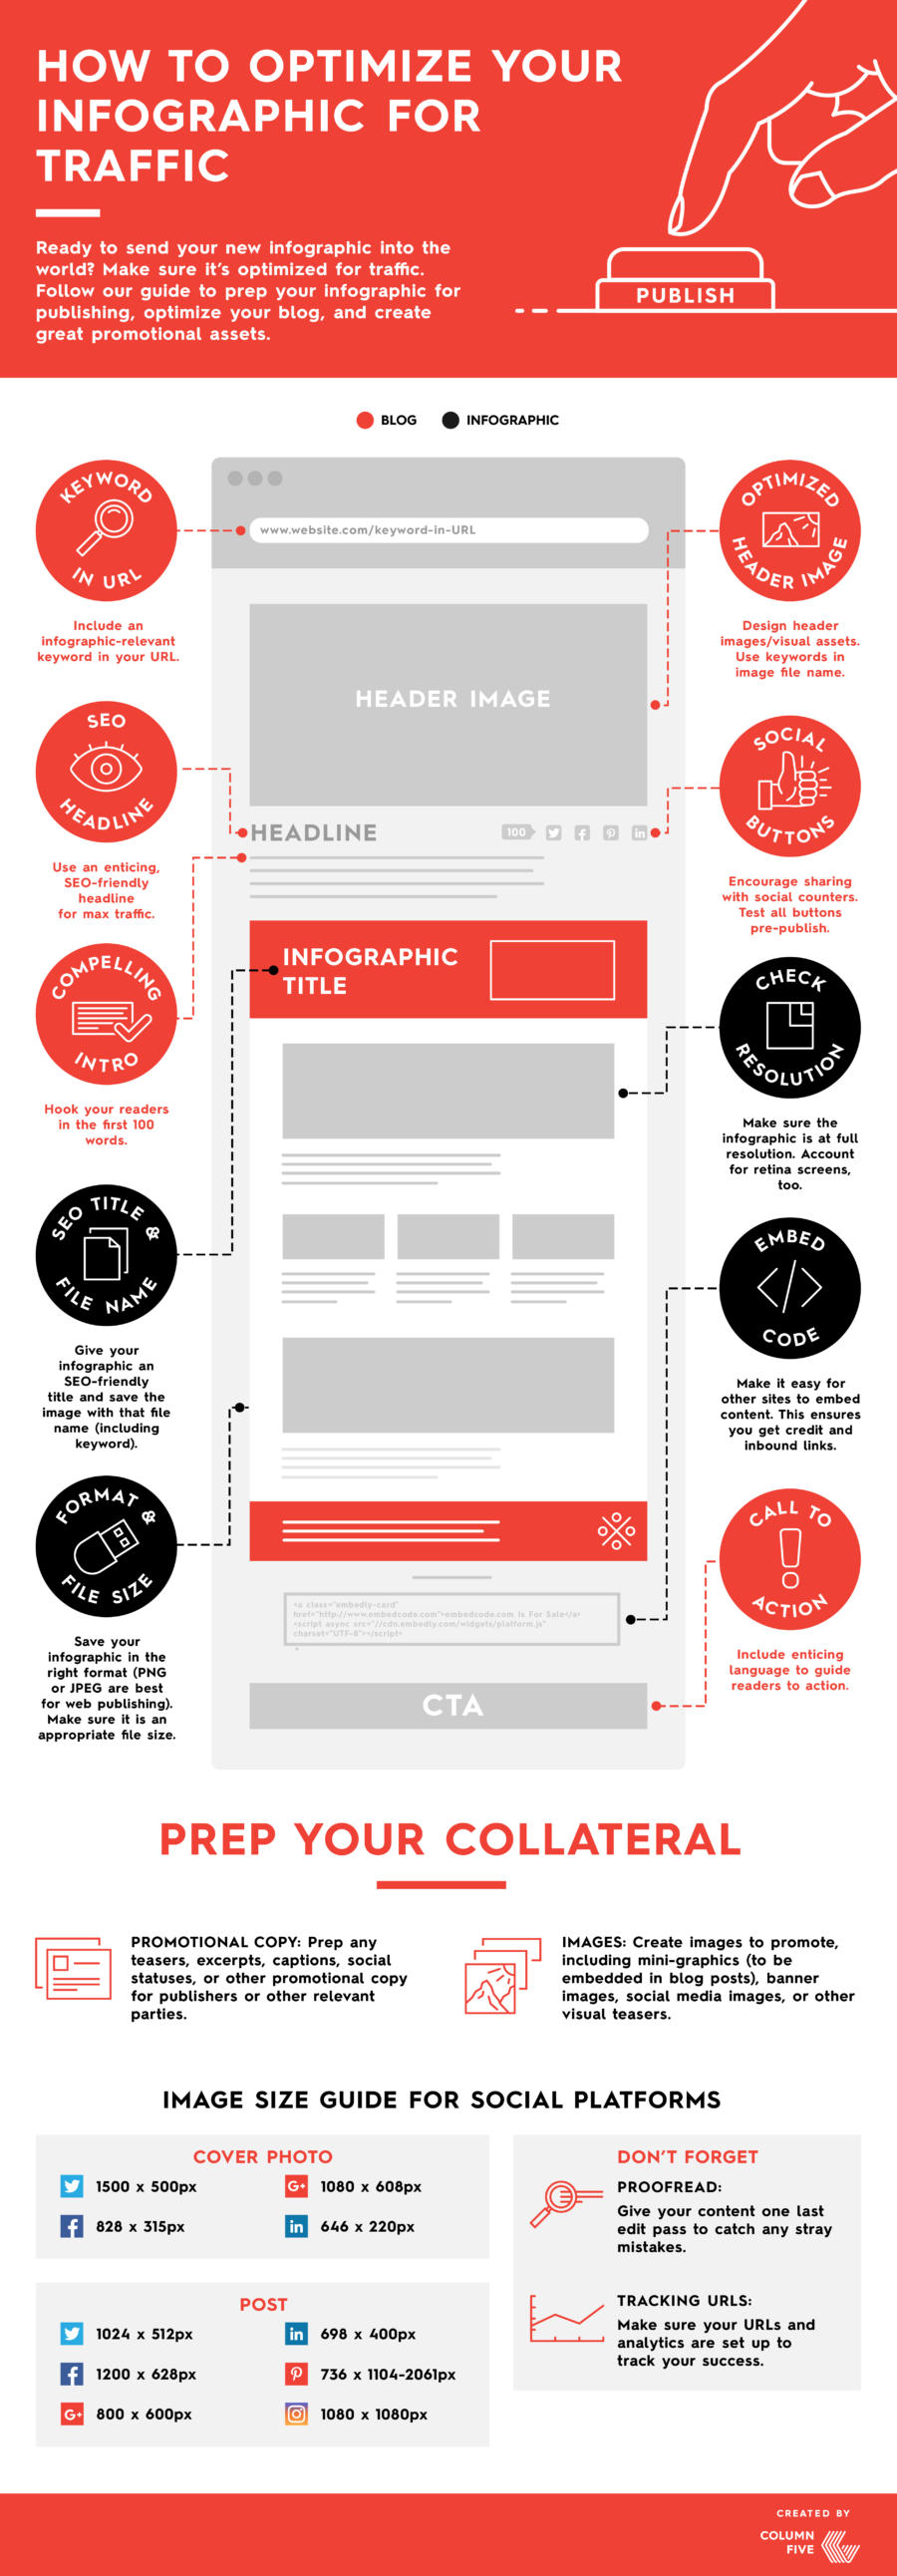 How to Get More Eyeballs on Your Infographics - #infographic